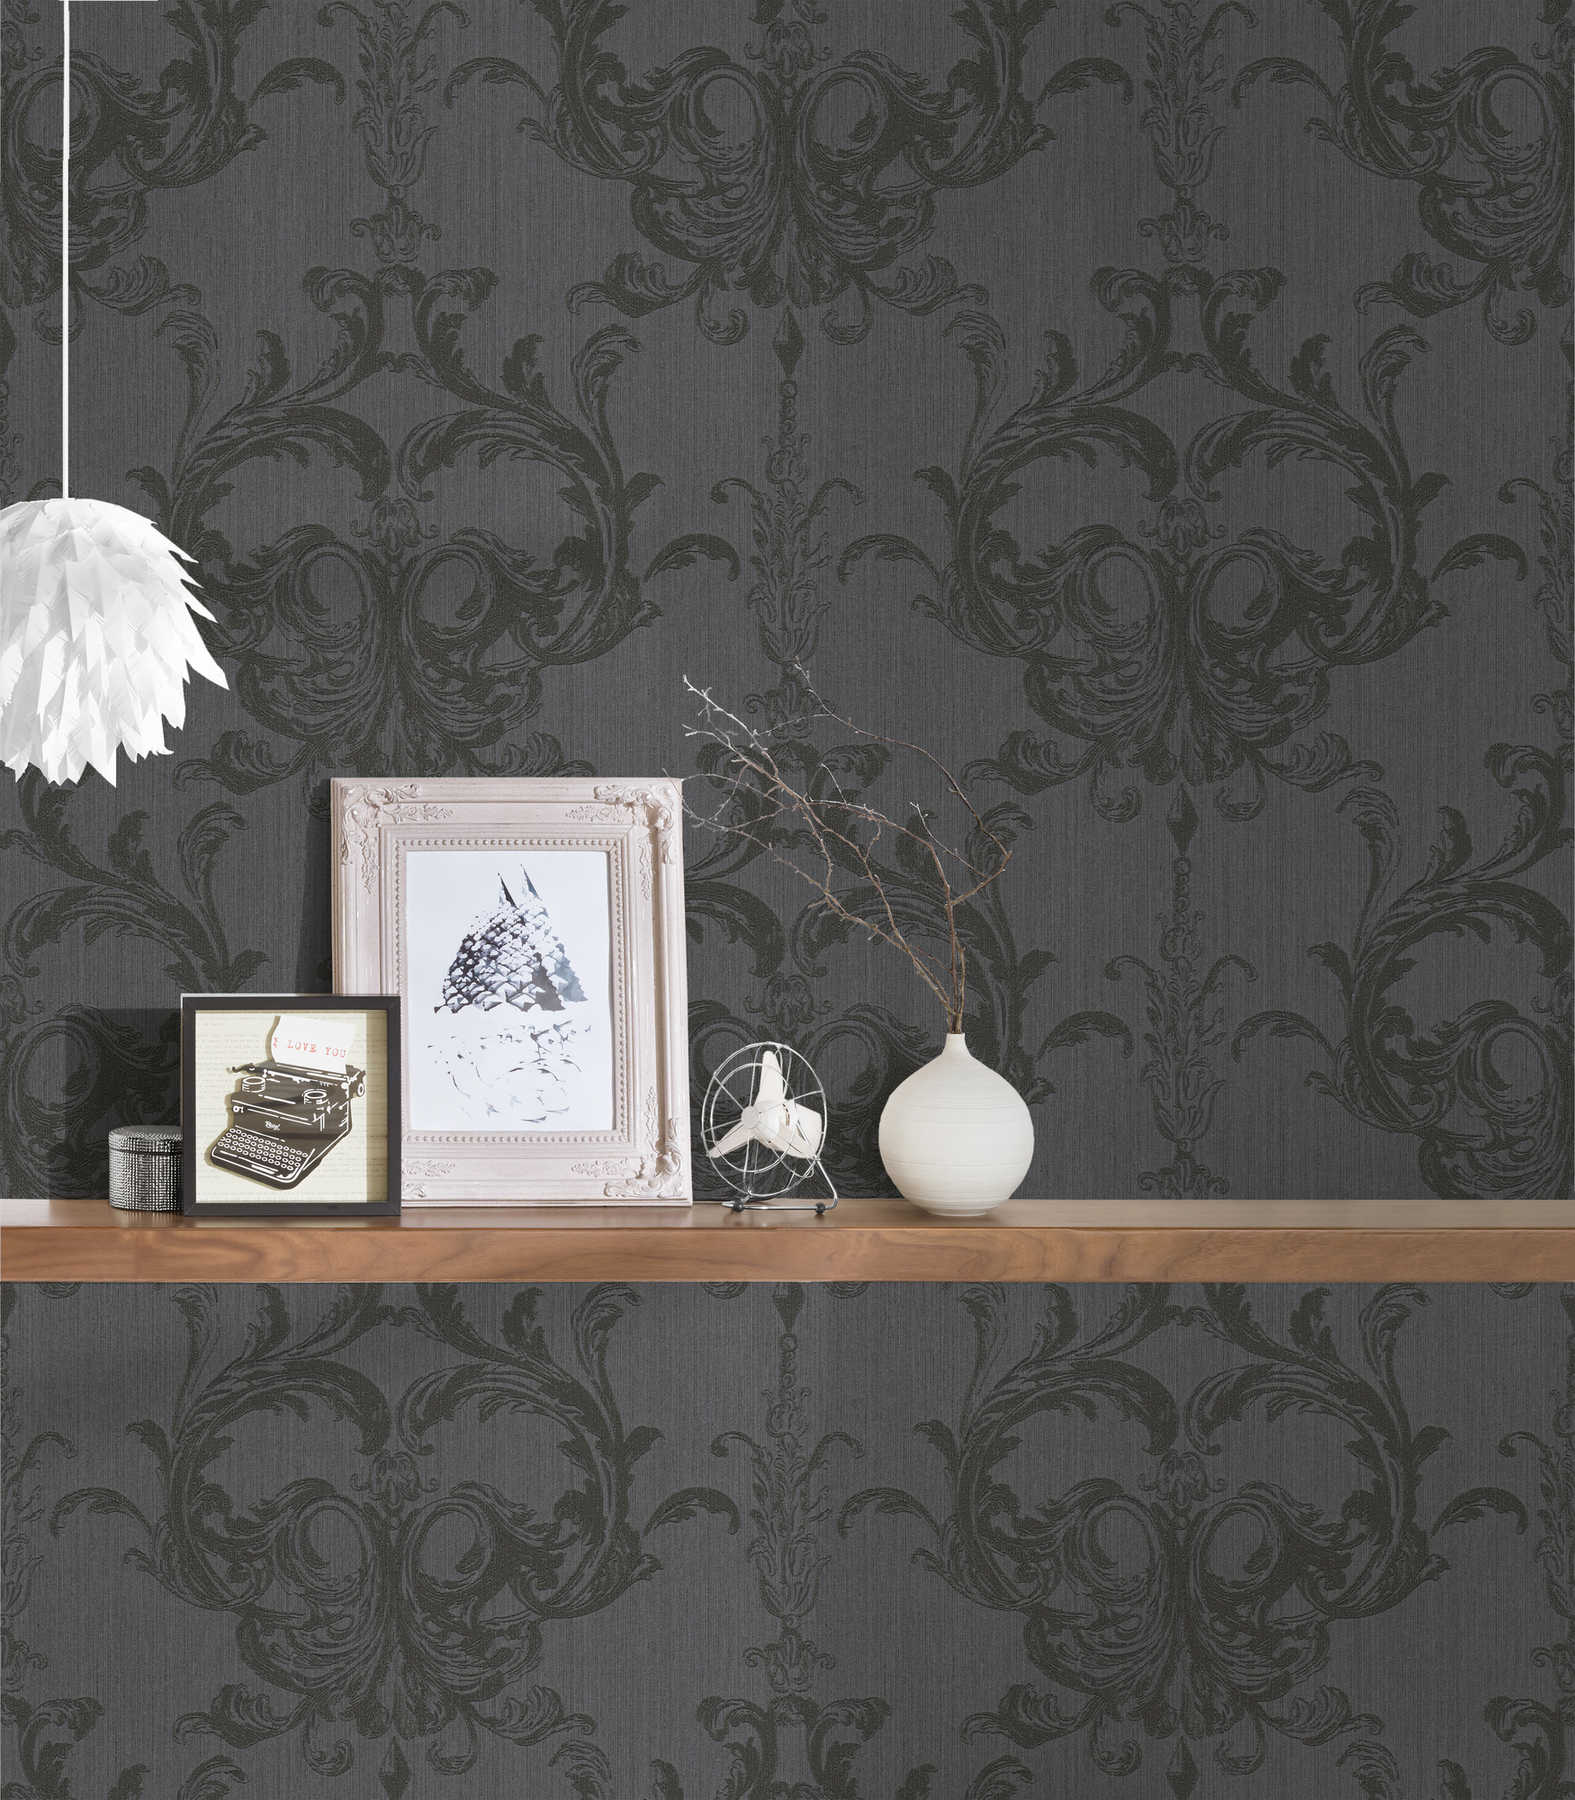             Ornament wallpaper detailed with textured pattern - brown
        